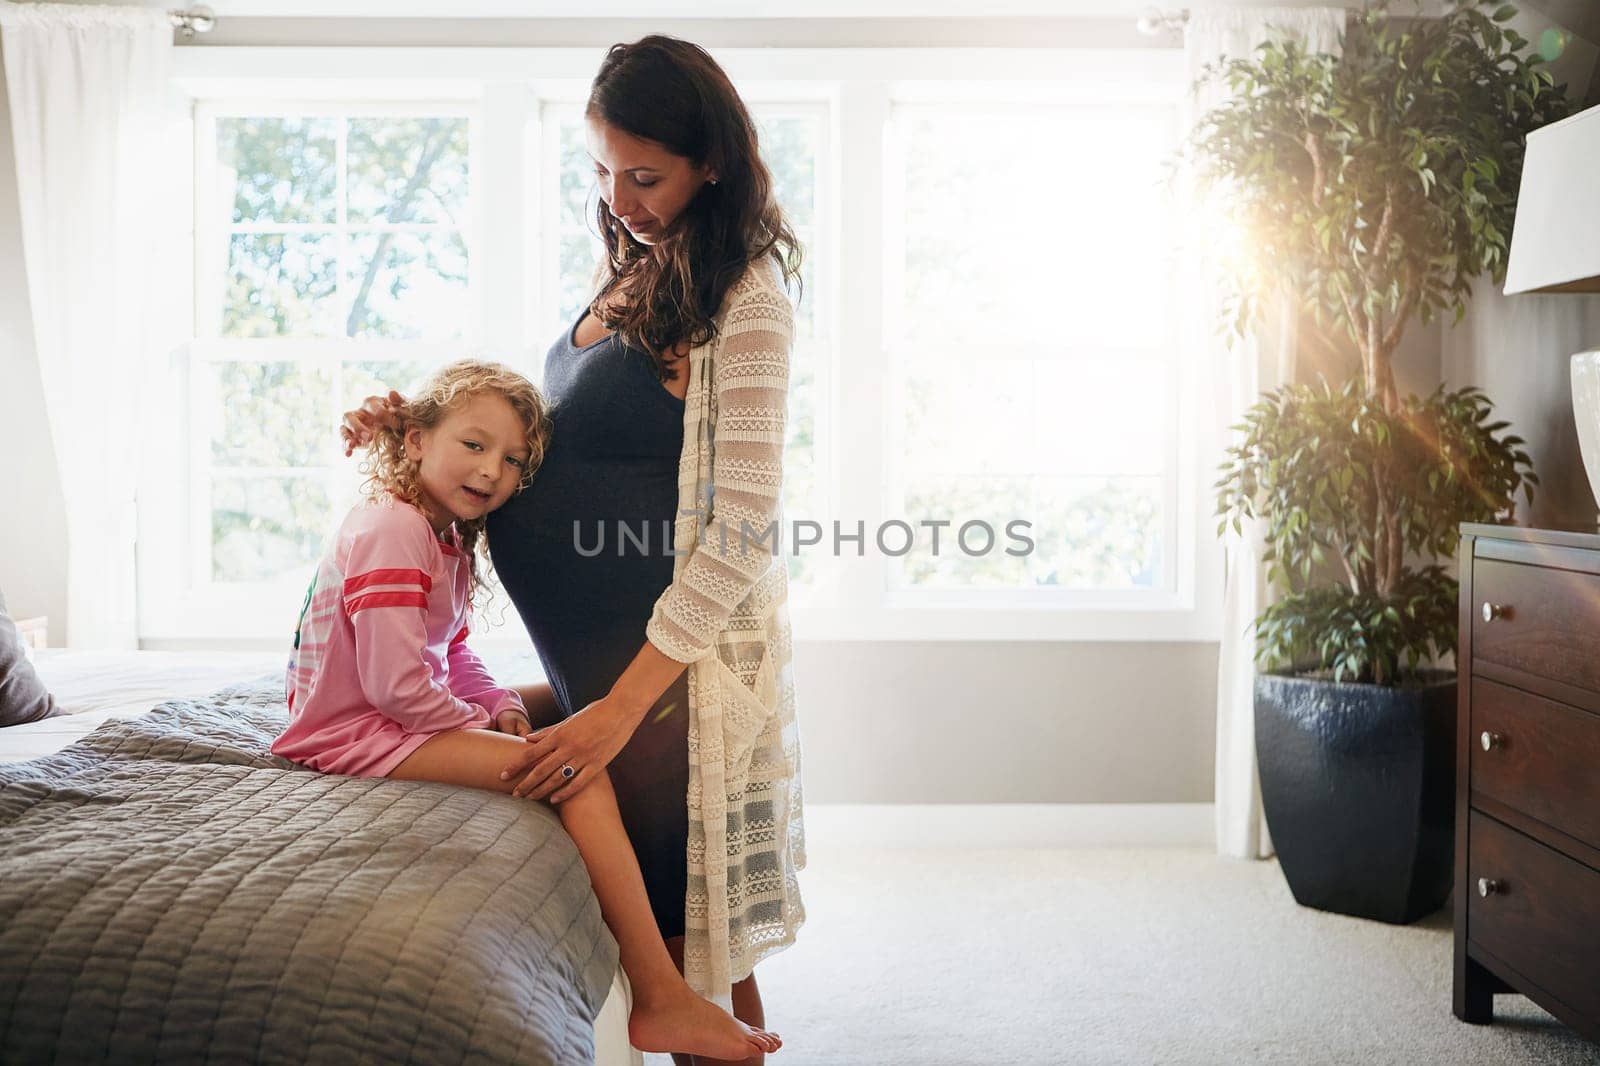 Bed, pregnant woman and kid listen to stomach, abdomen or girl hearing heartbeat, moving baby or family development. Mom, home bedroom and young child curious over pregnancy, maternity or life growth.